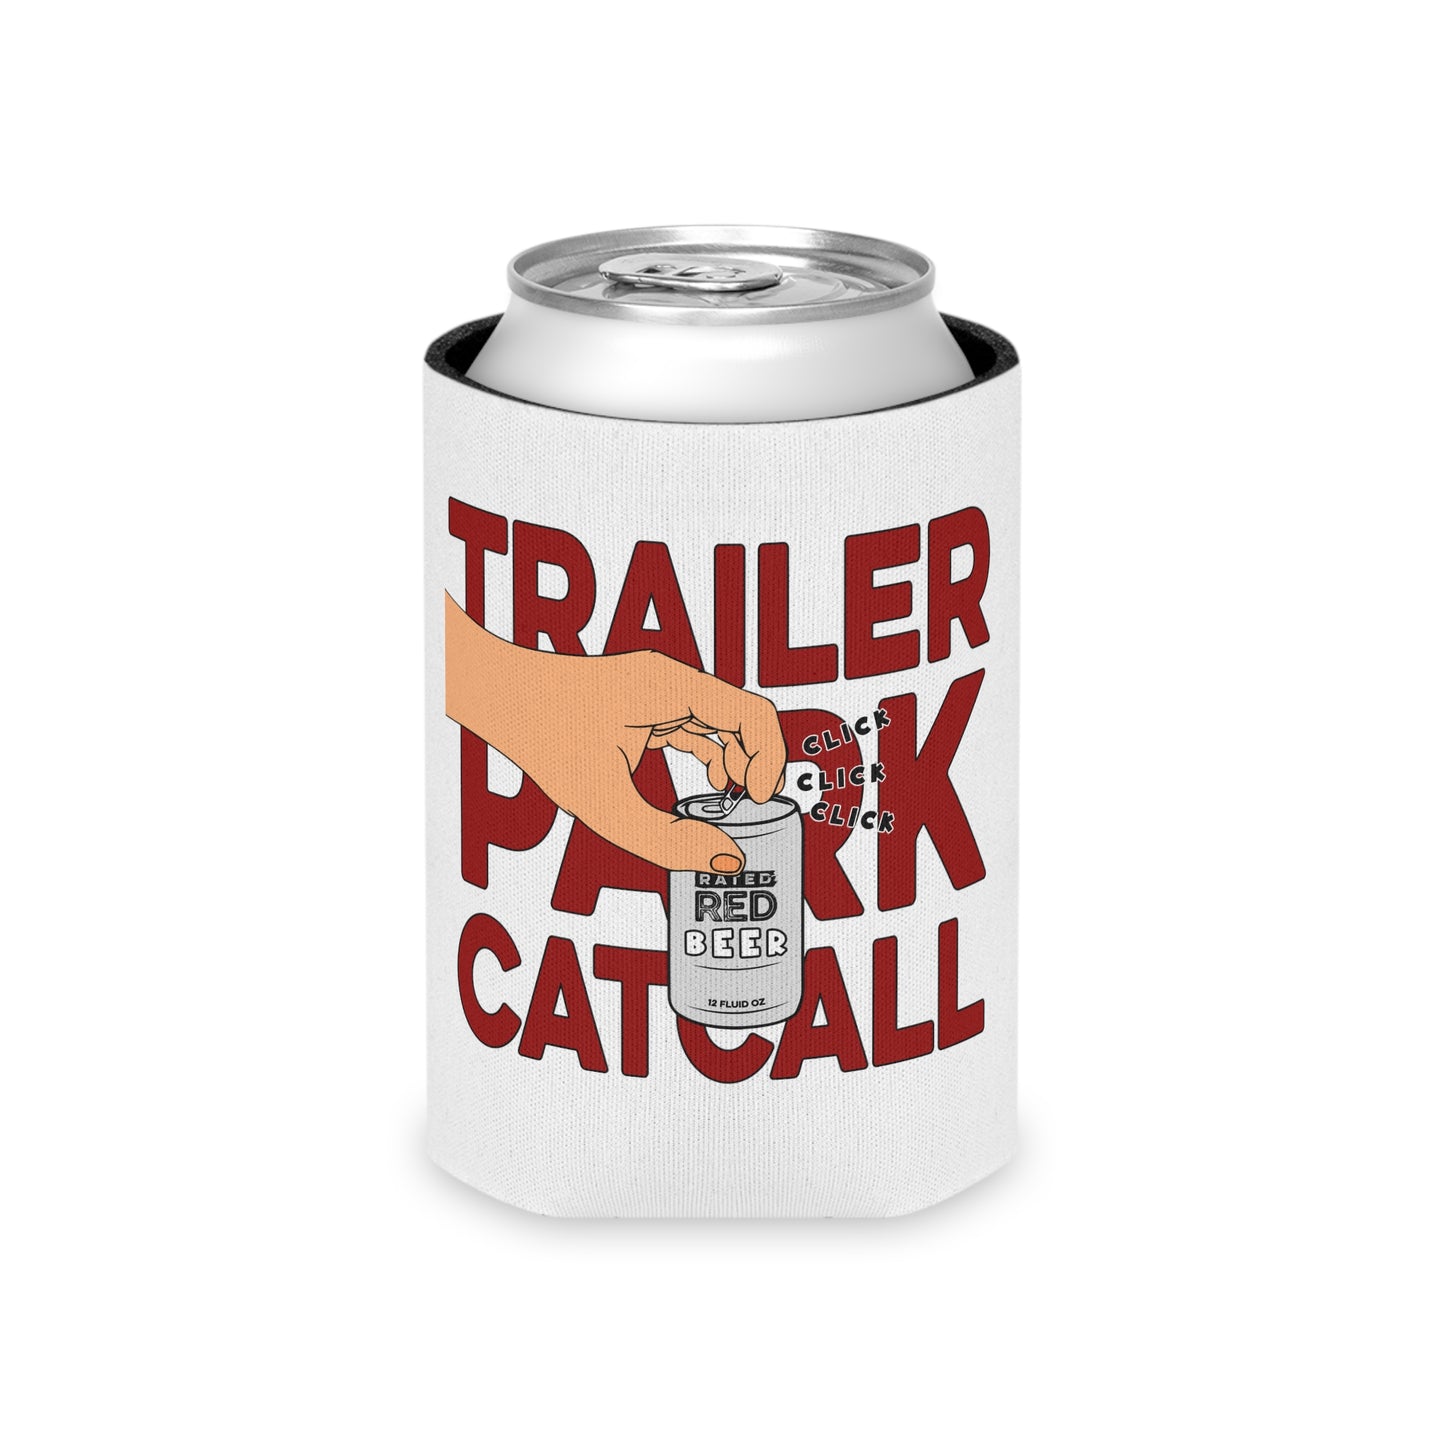 Trailer Park Catcall Koozie Rated Red